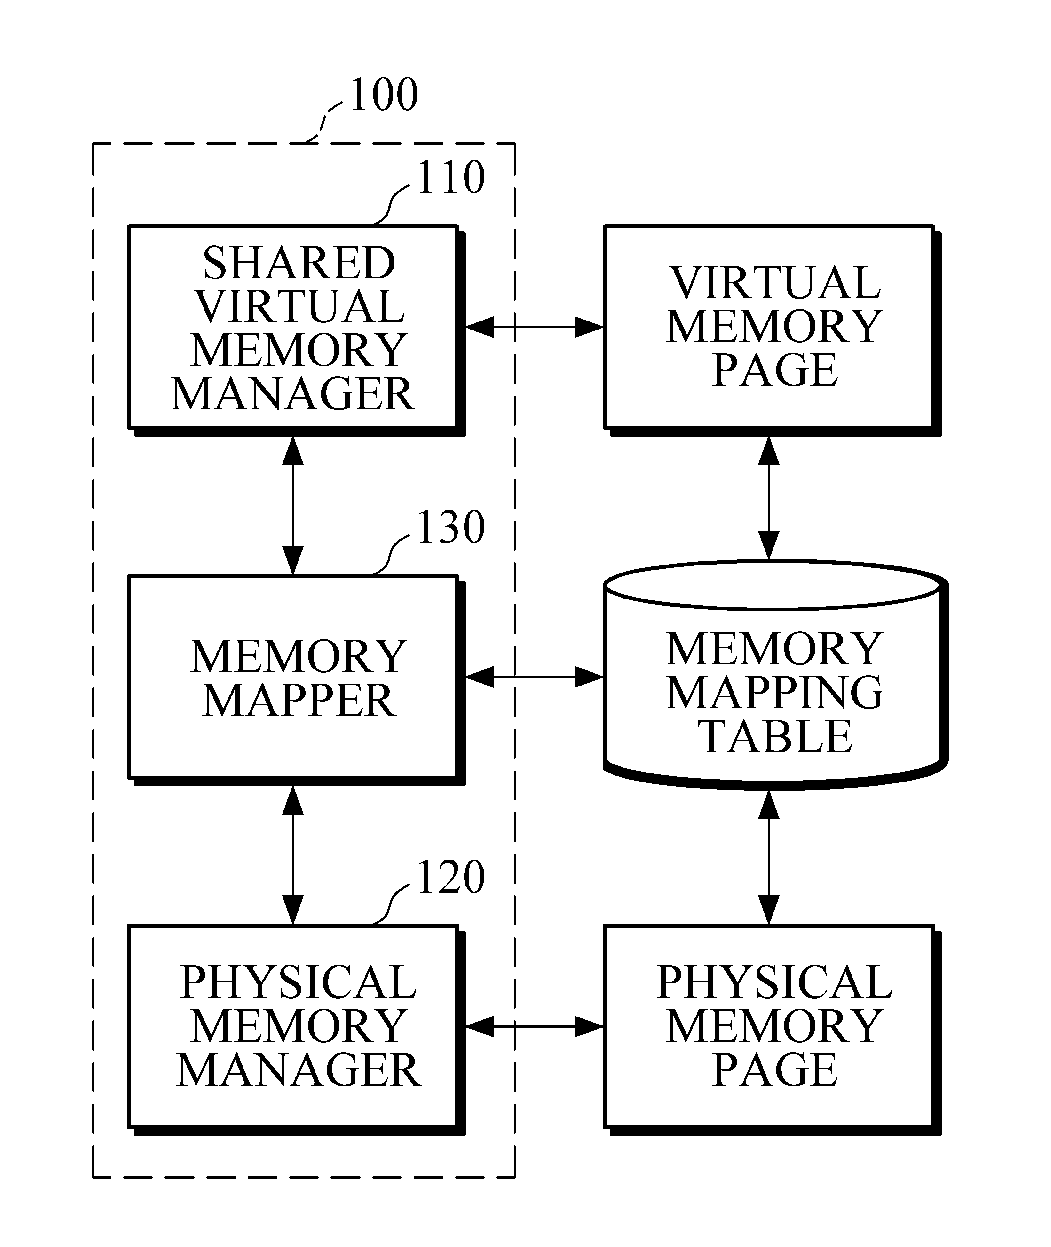 Shared virtual memory management apparatus for providing cache-coherence